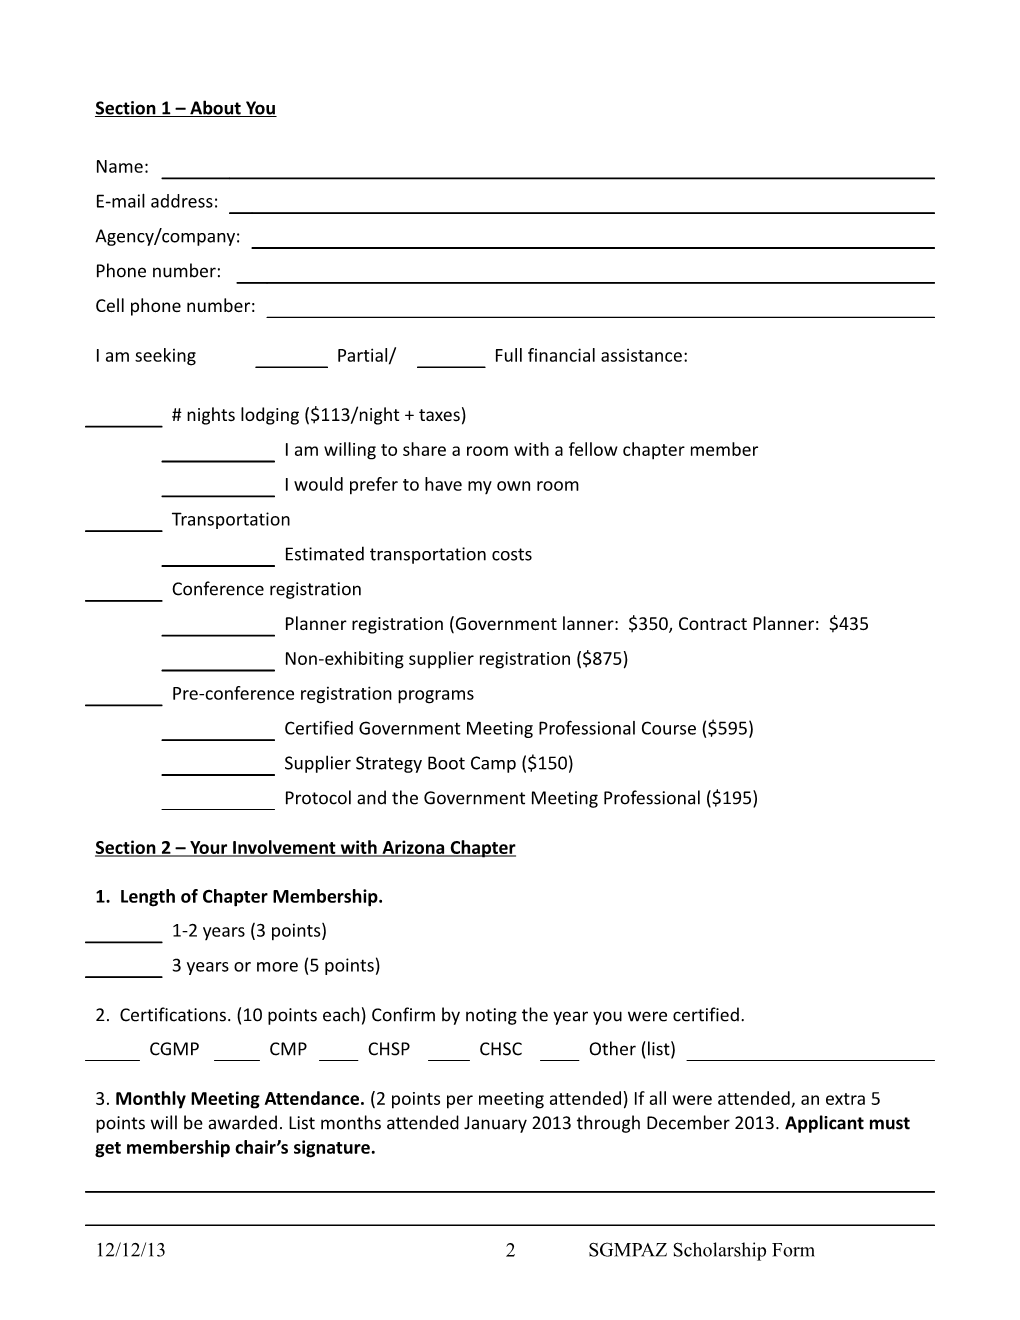 SGMP Chapter Scholarship Application